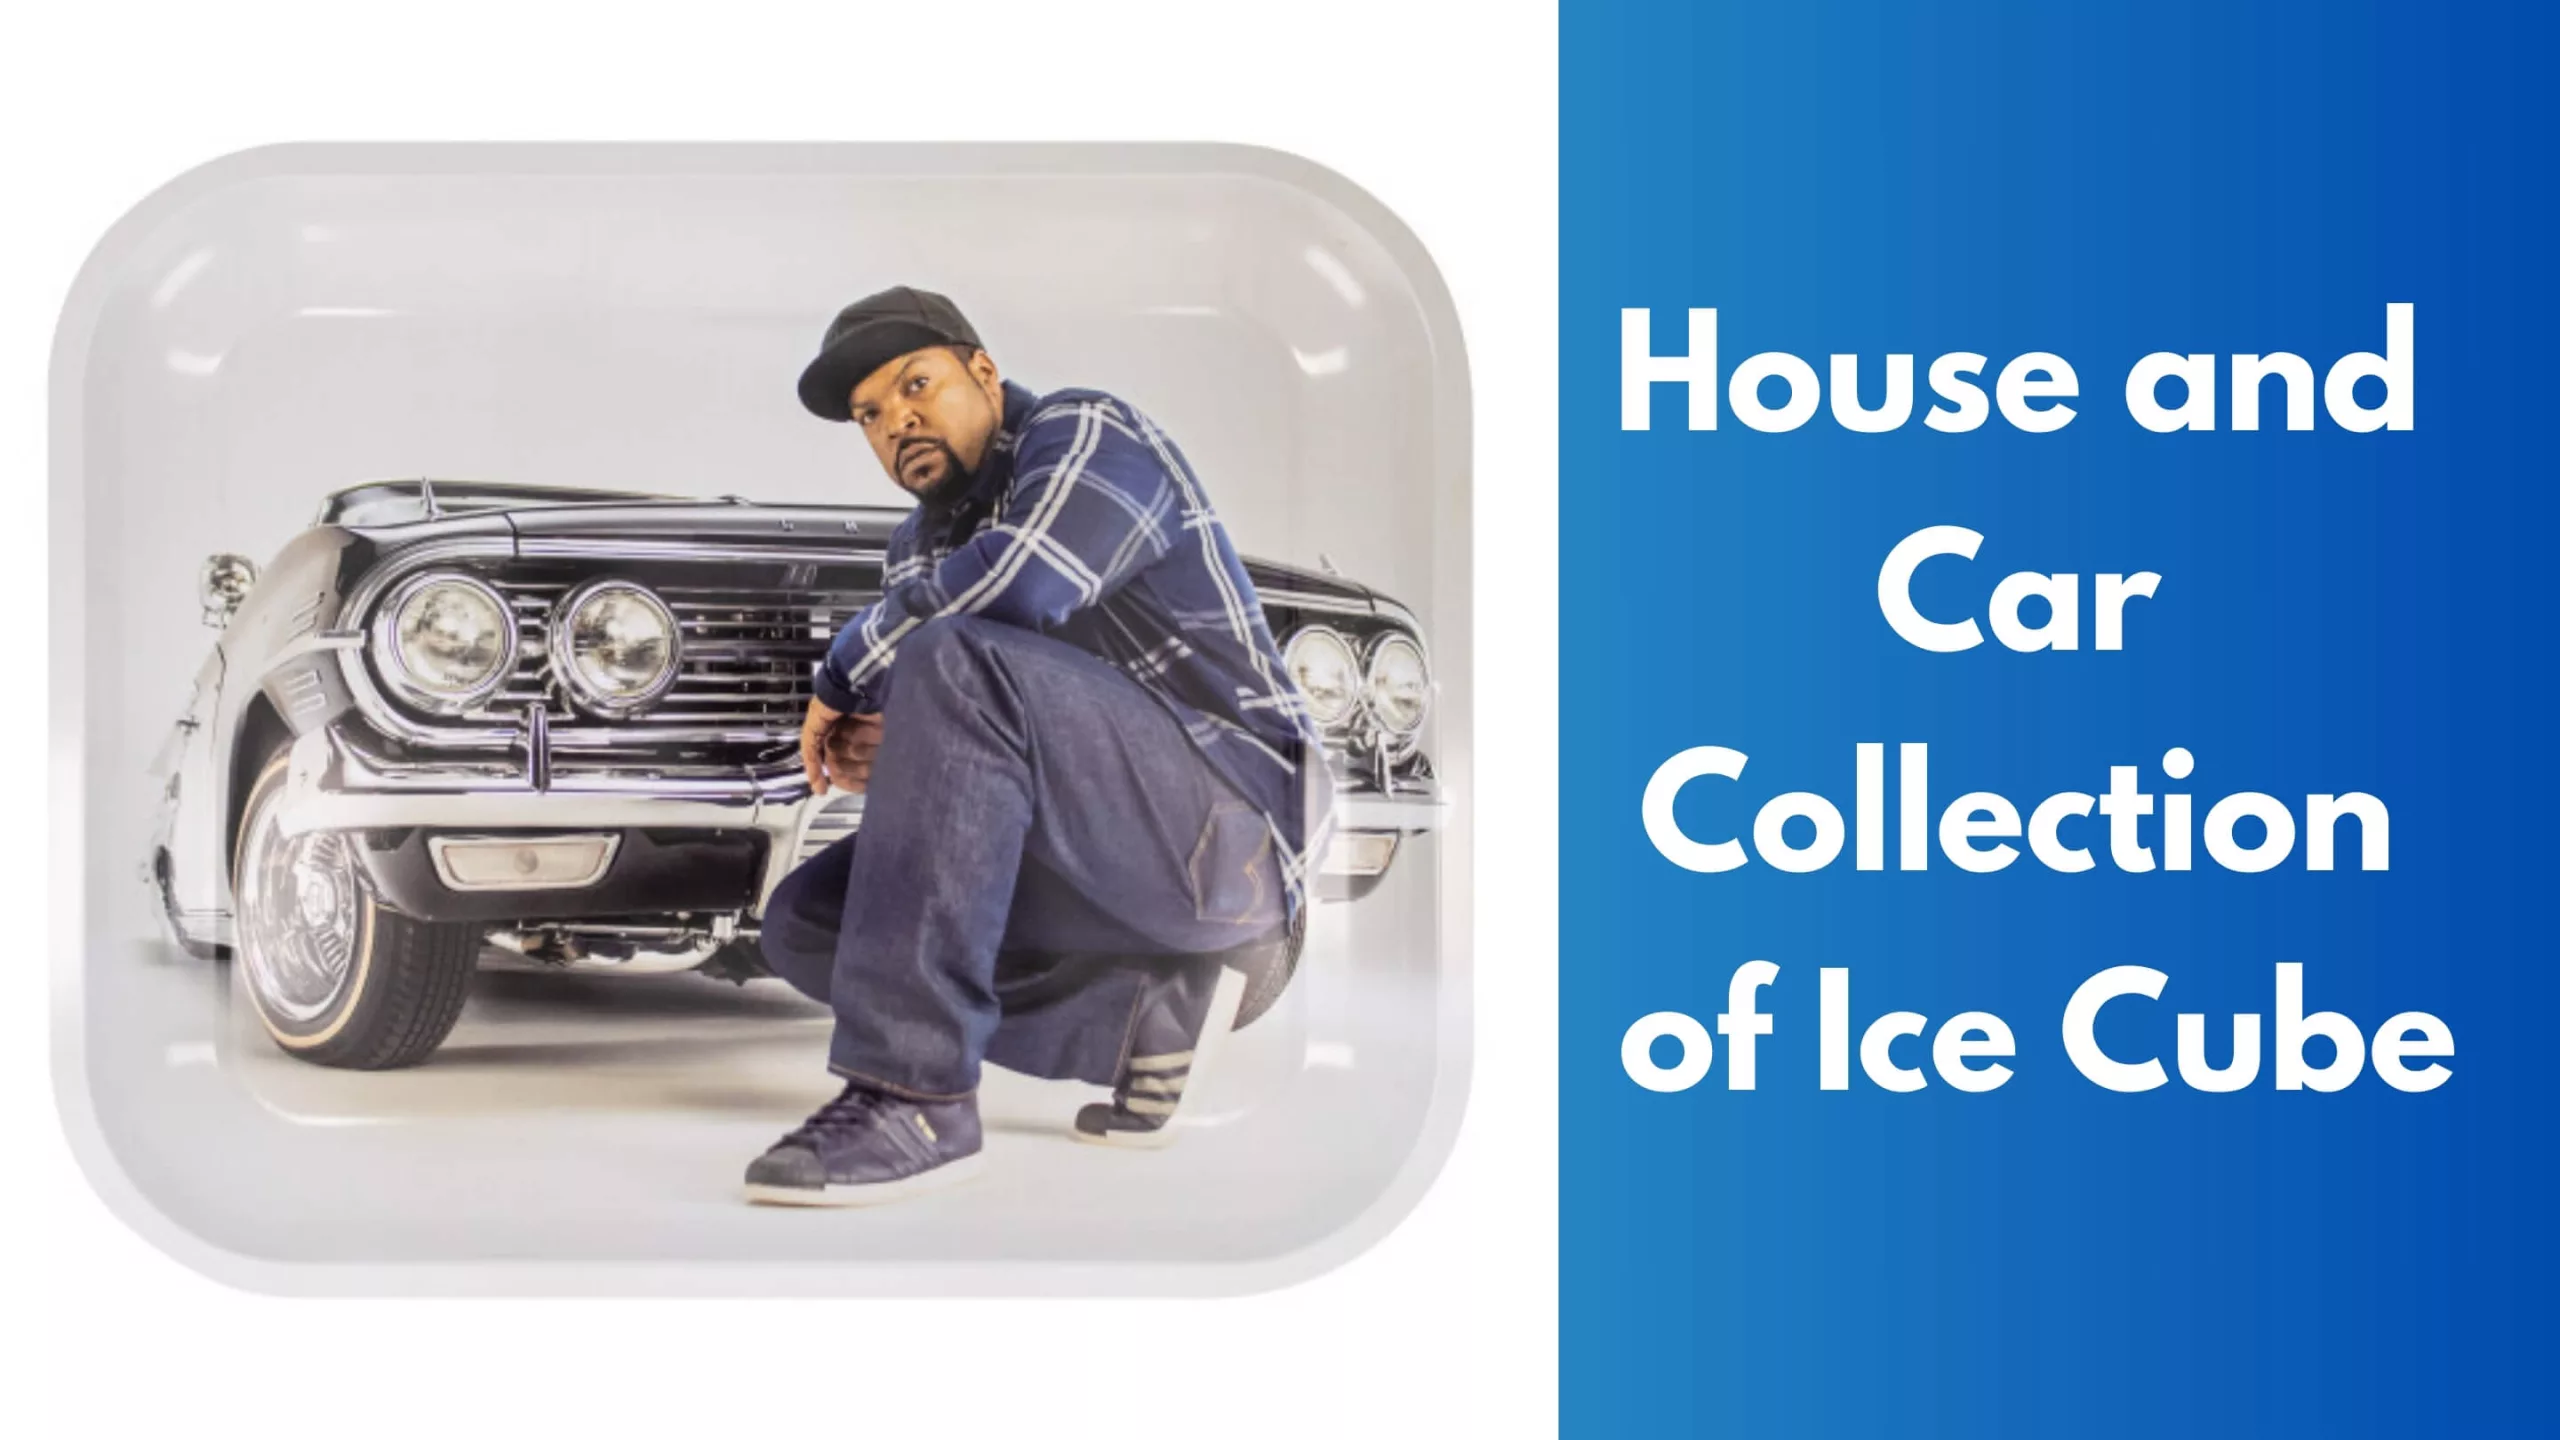 House and Car Collection of Ice Cube